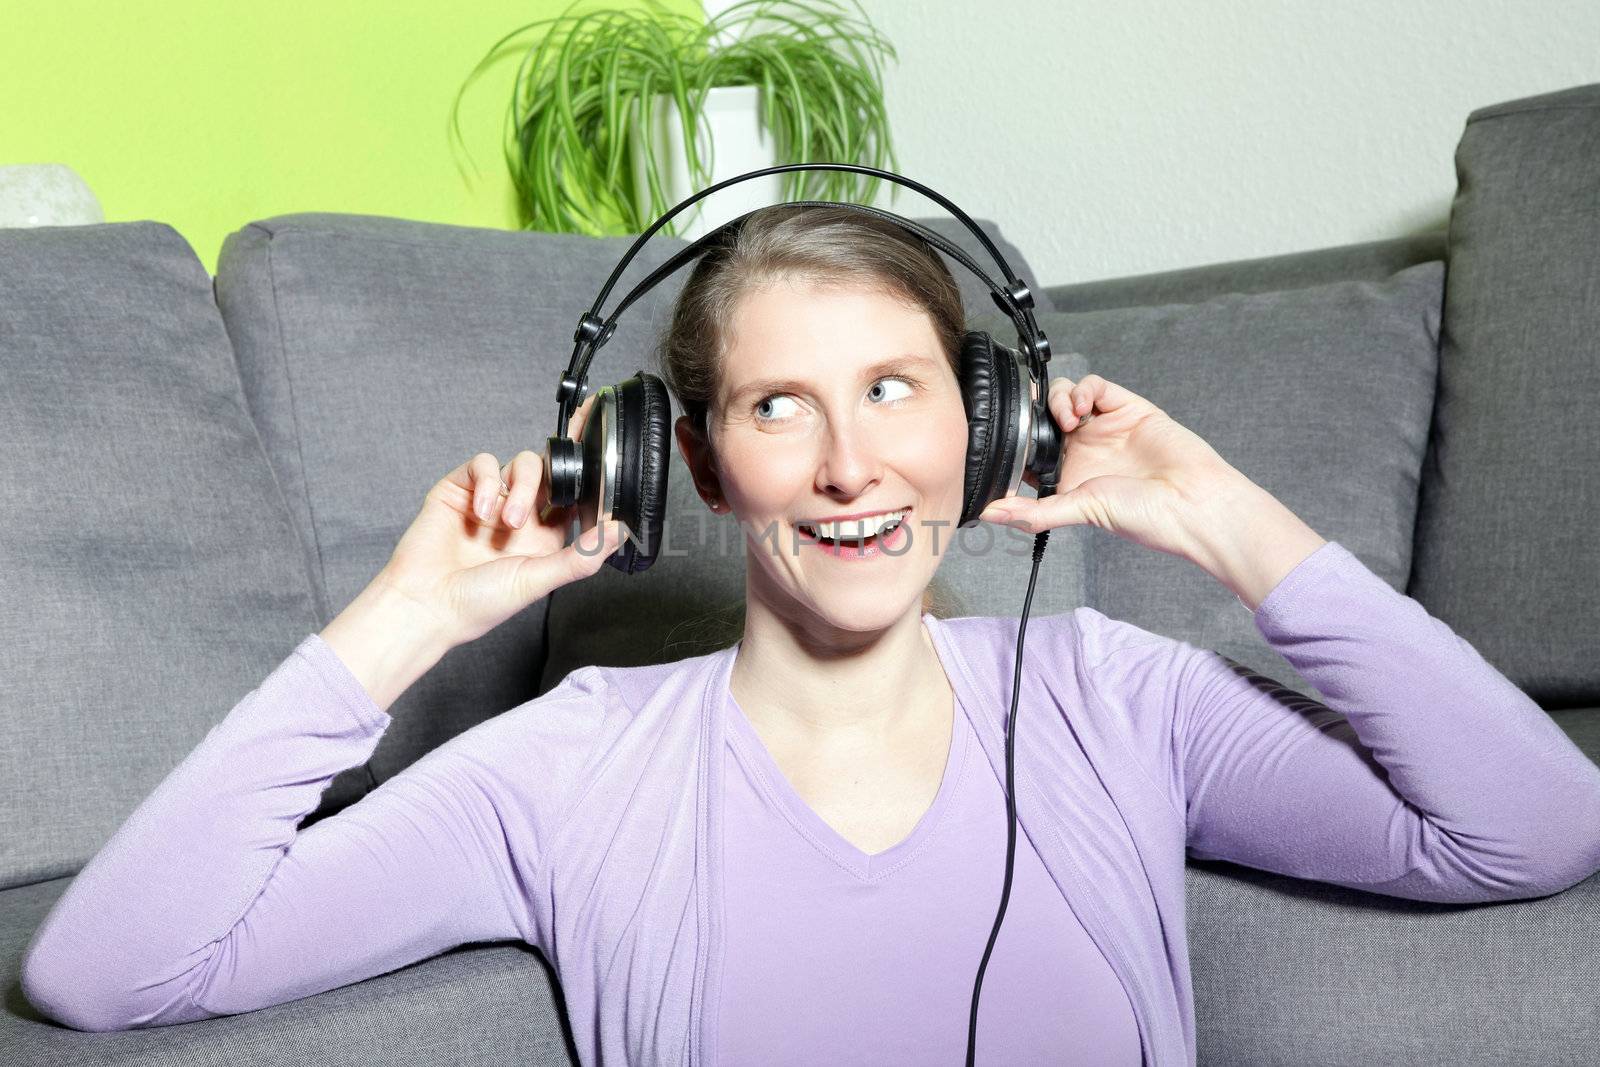 Laughing mature woman listening to music by Farina6000